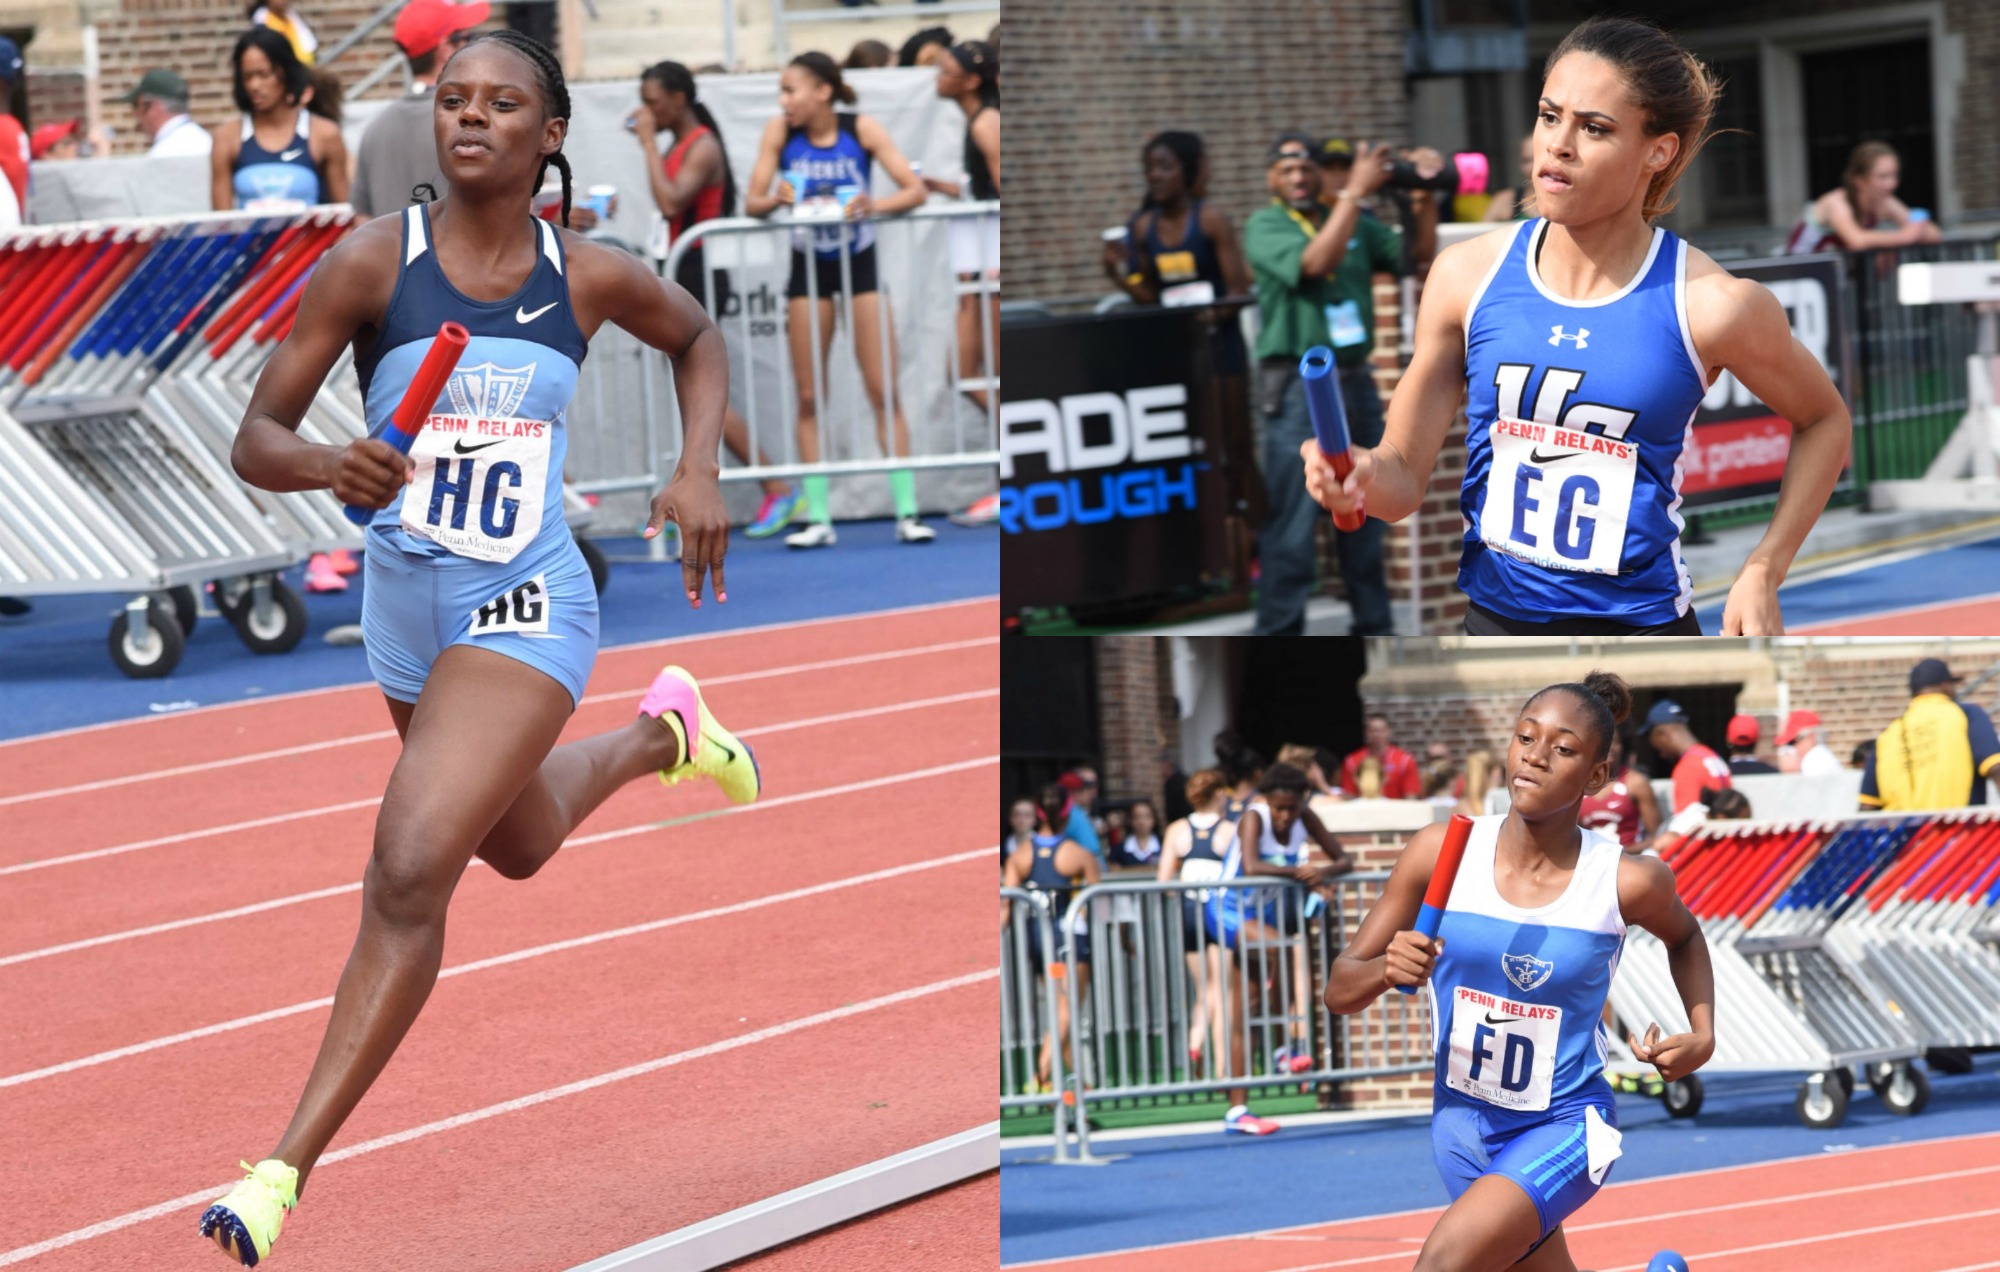 Girls 4×4 will be hot as Edwin Allen qualifies for 3 finals at Penn Relays